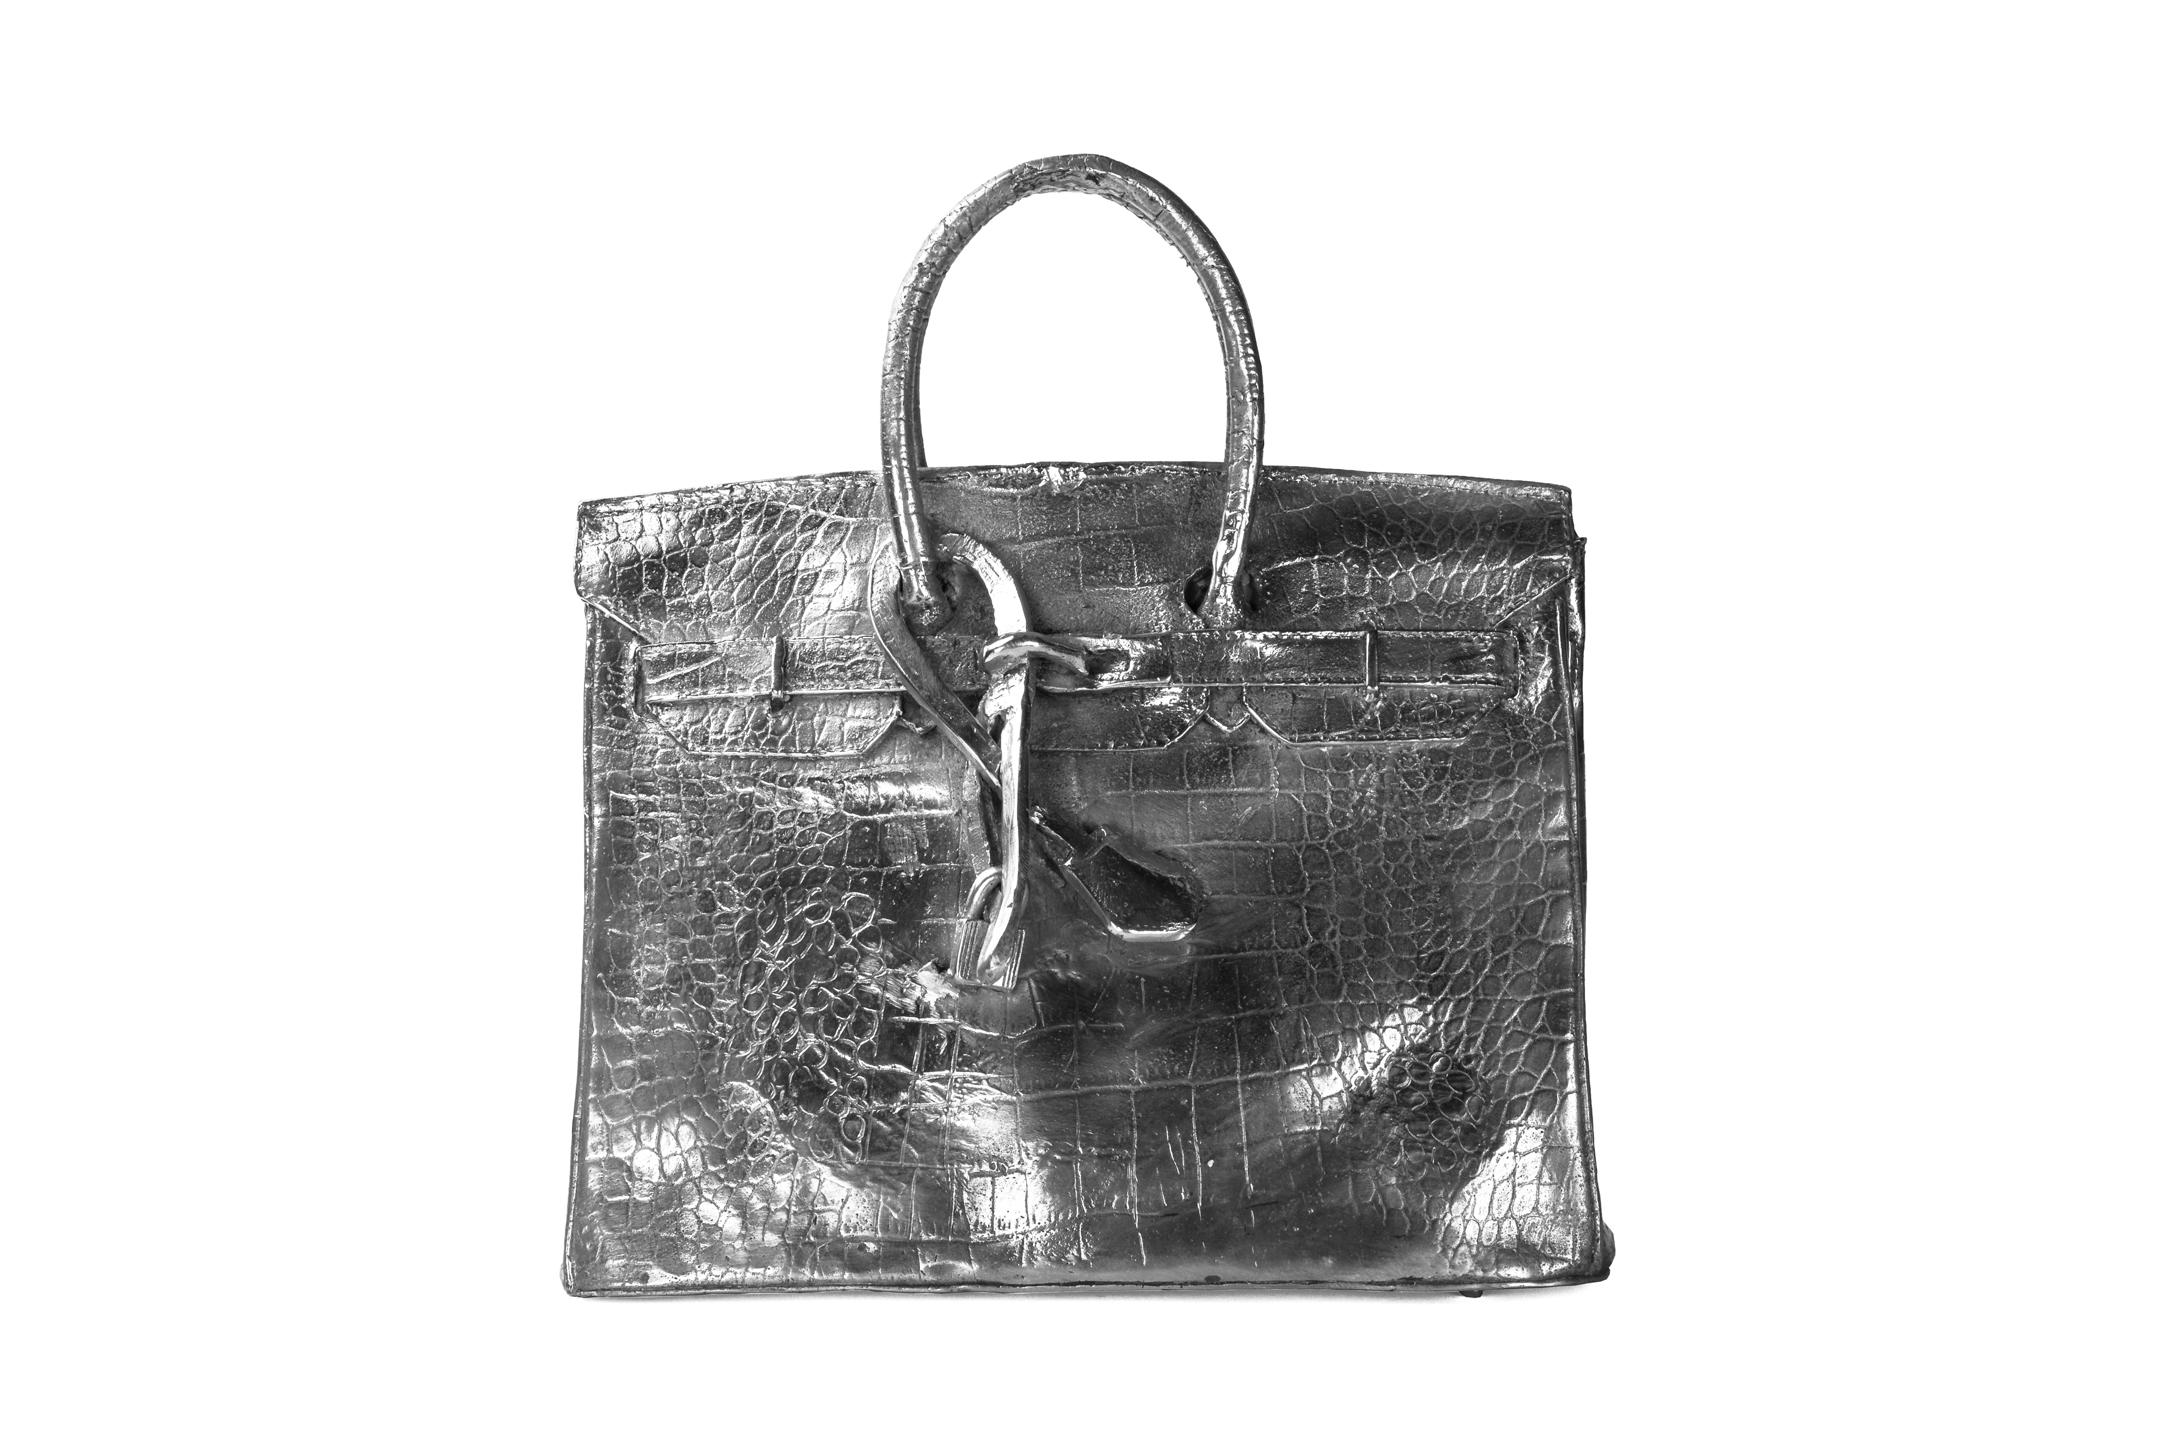 Hermes Birkin Bag Cast Aluminum Sculpture In Good Condition For Sale In New York, NY